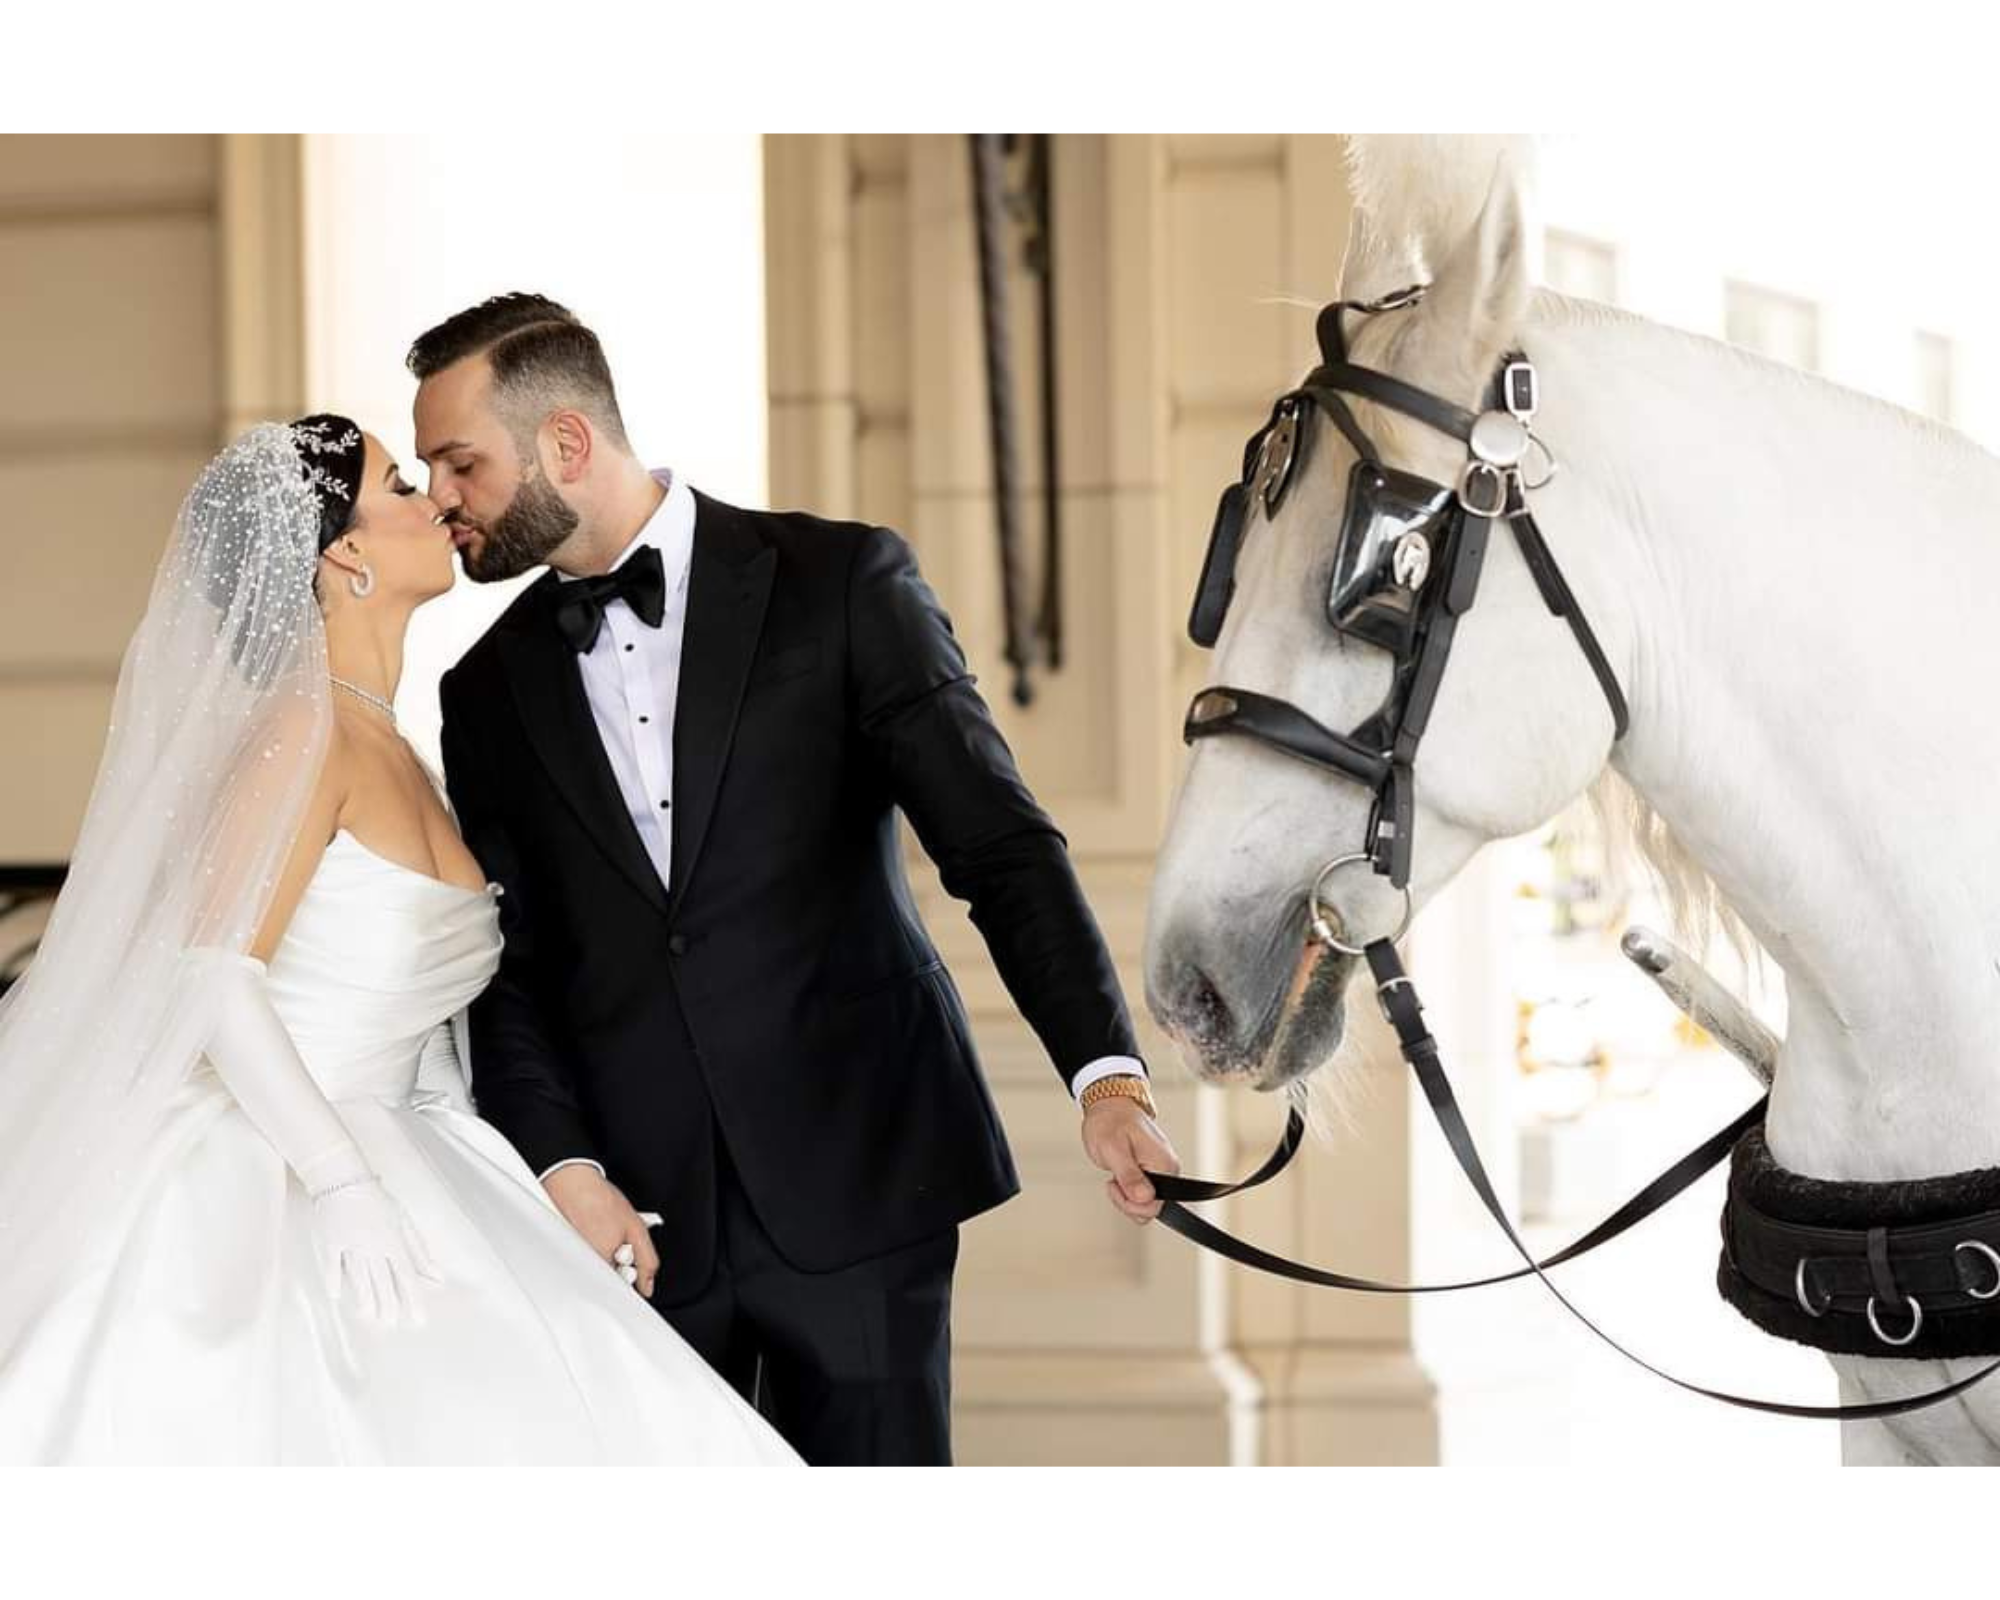 A fairytale wedding moment as a bride and groom kiss beside a beautiful white horse!